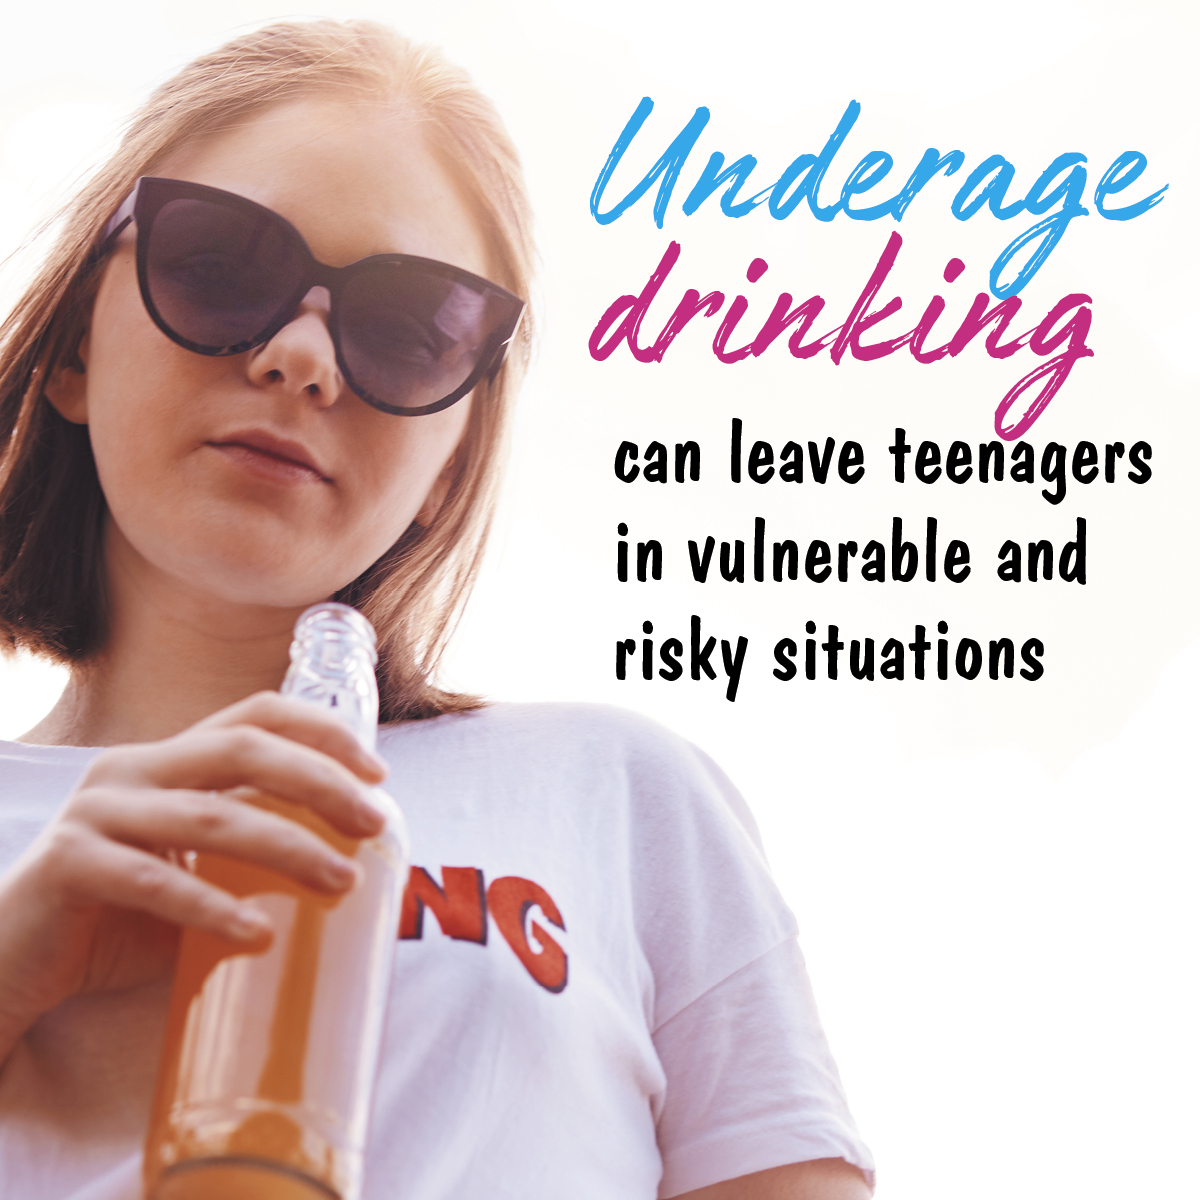 Underage drinking can leave teenagers in vulnerable and risk situations